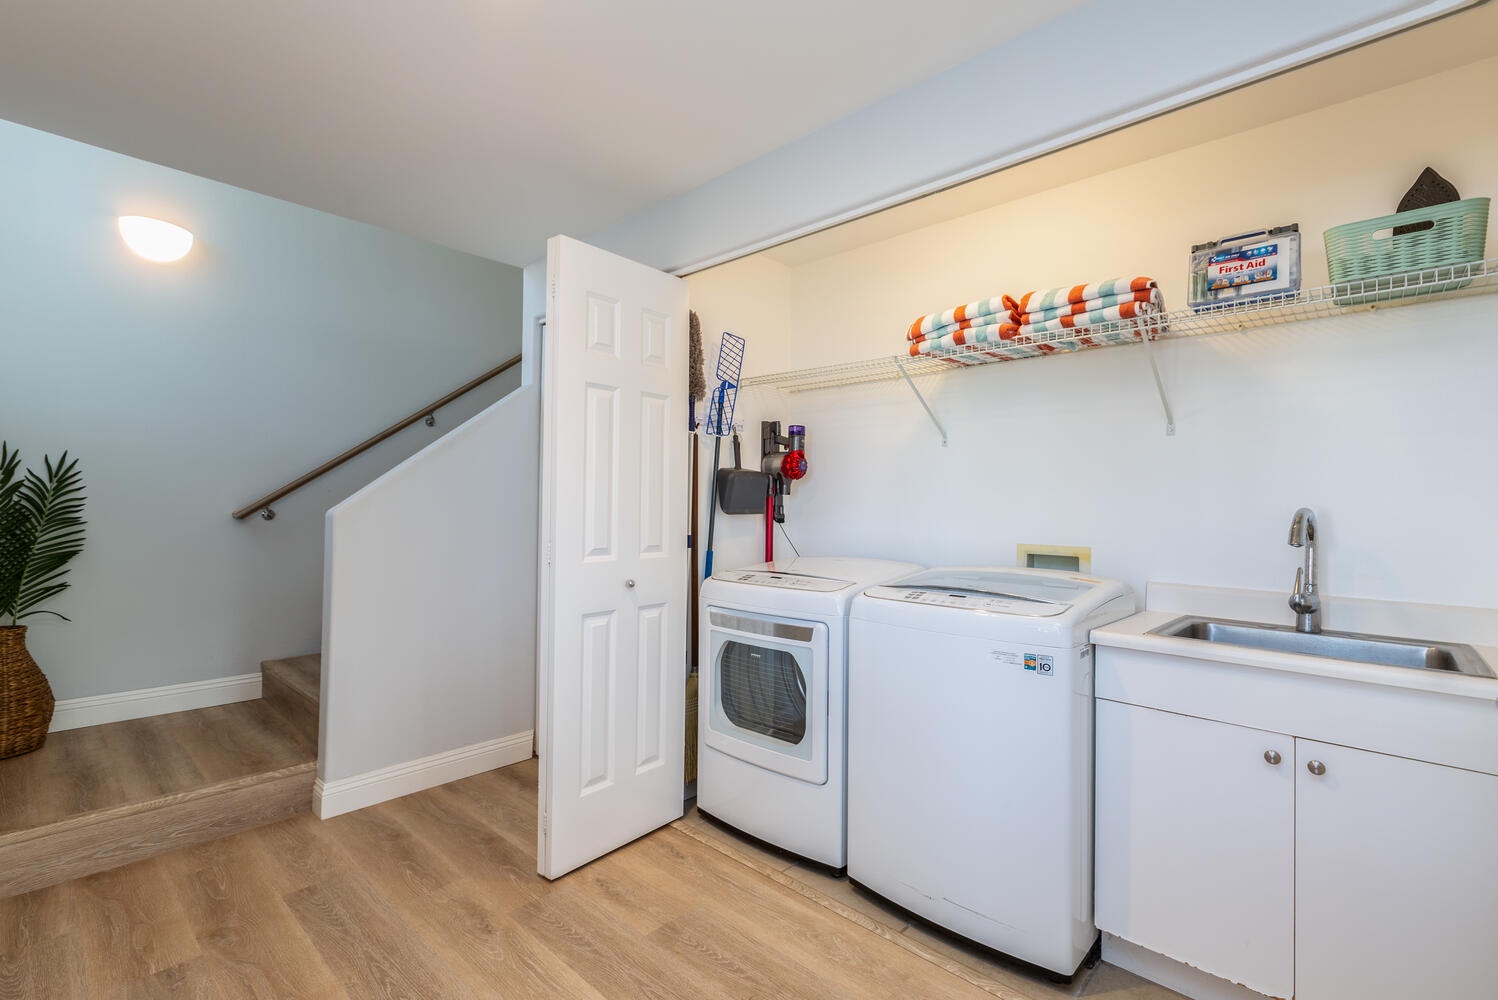 Princeville Vacation Rentals, Sea Glass - The spacious laundry room with a washer and a dryer.